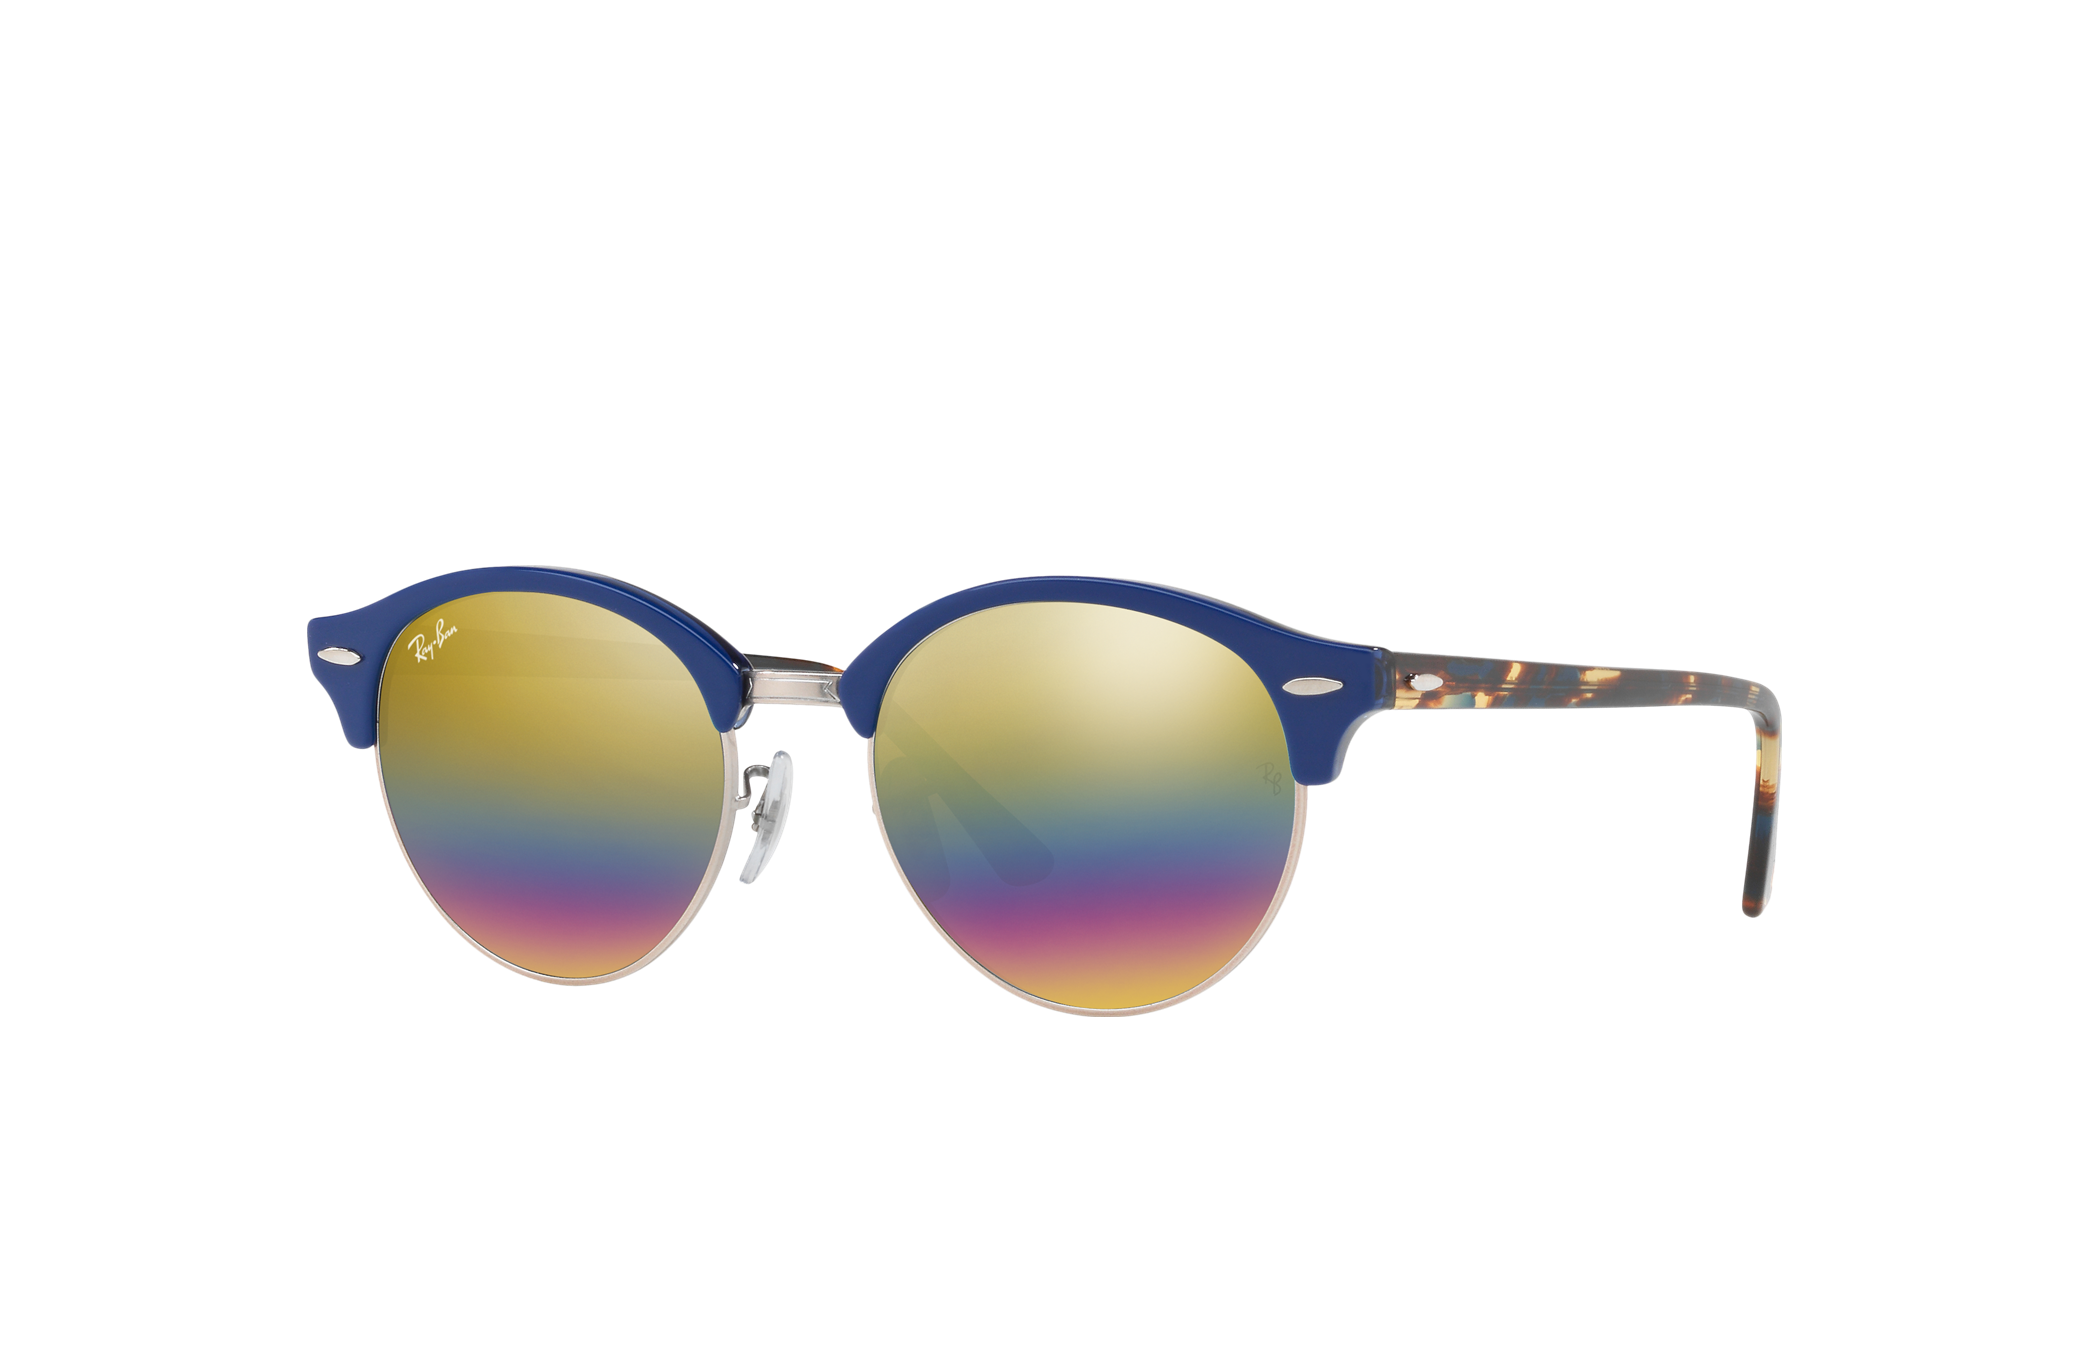 Clubround Mineral Flash Lenses Sunglasses in Blue and Gold Rainbow | Ray-Ban ®